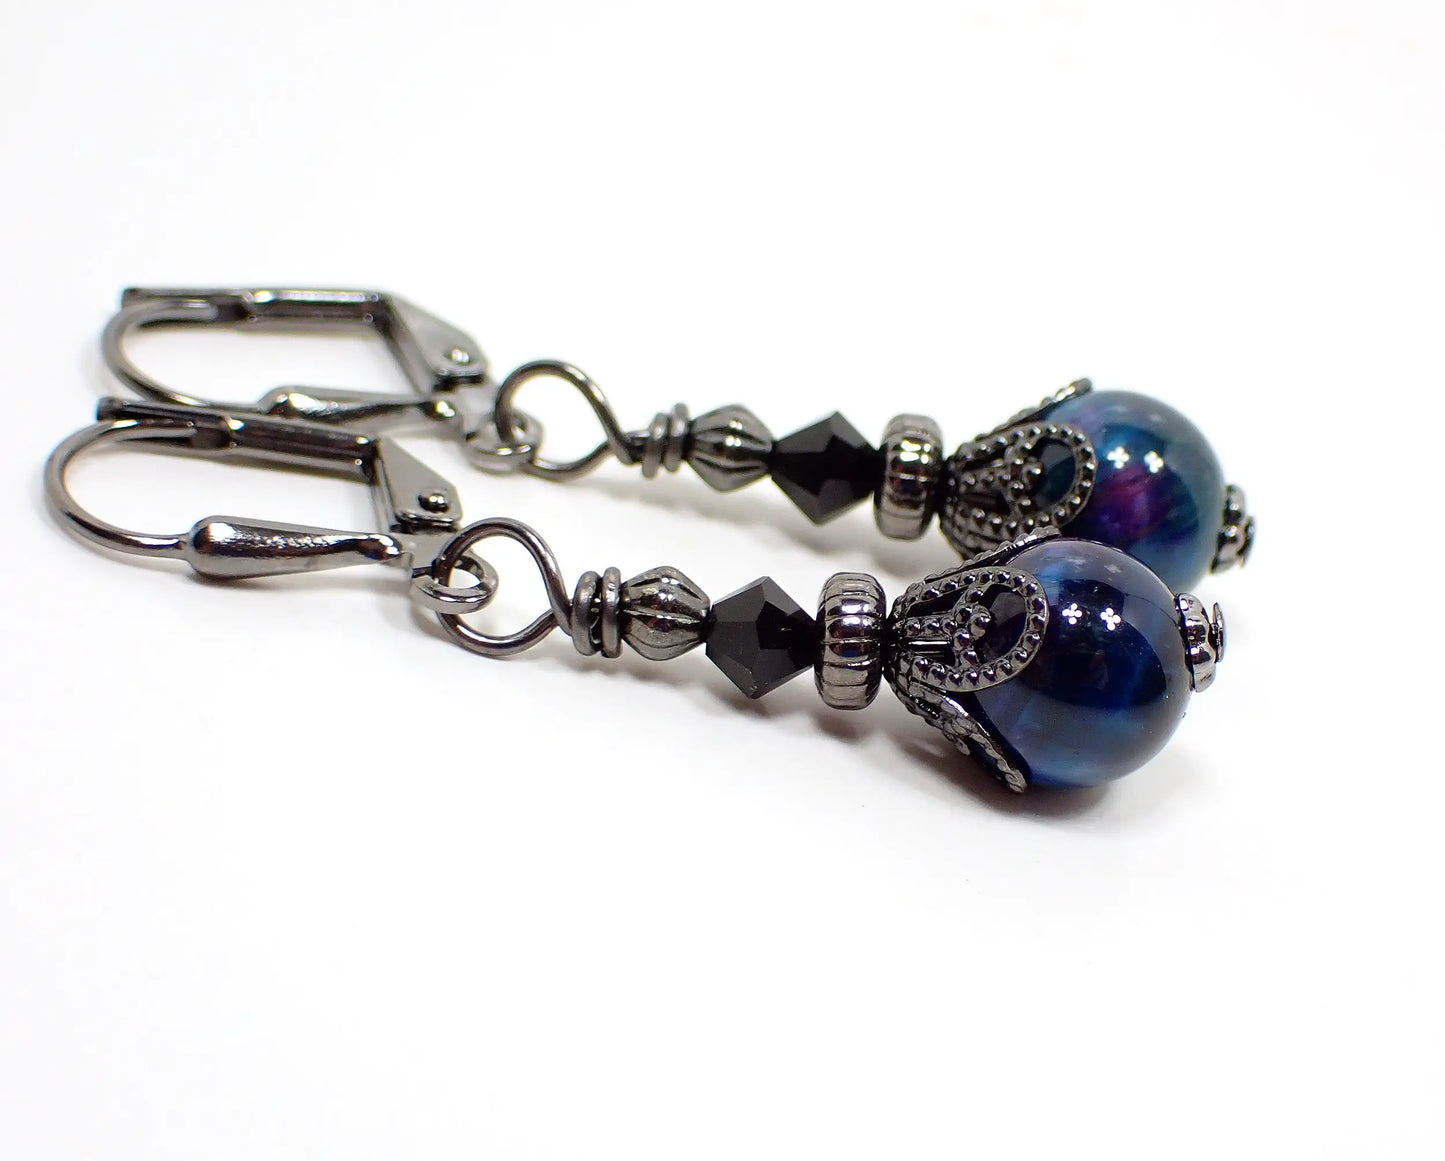 Small Blue and Purple Dyed Tiger's Eye Handmade Drop Earrings, Gunmetal Plated Hook Lever Back or Clip On